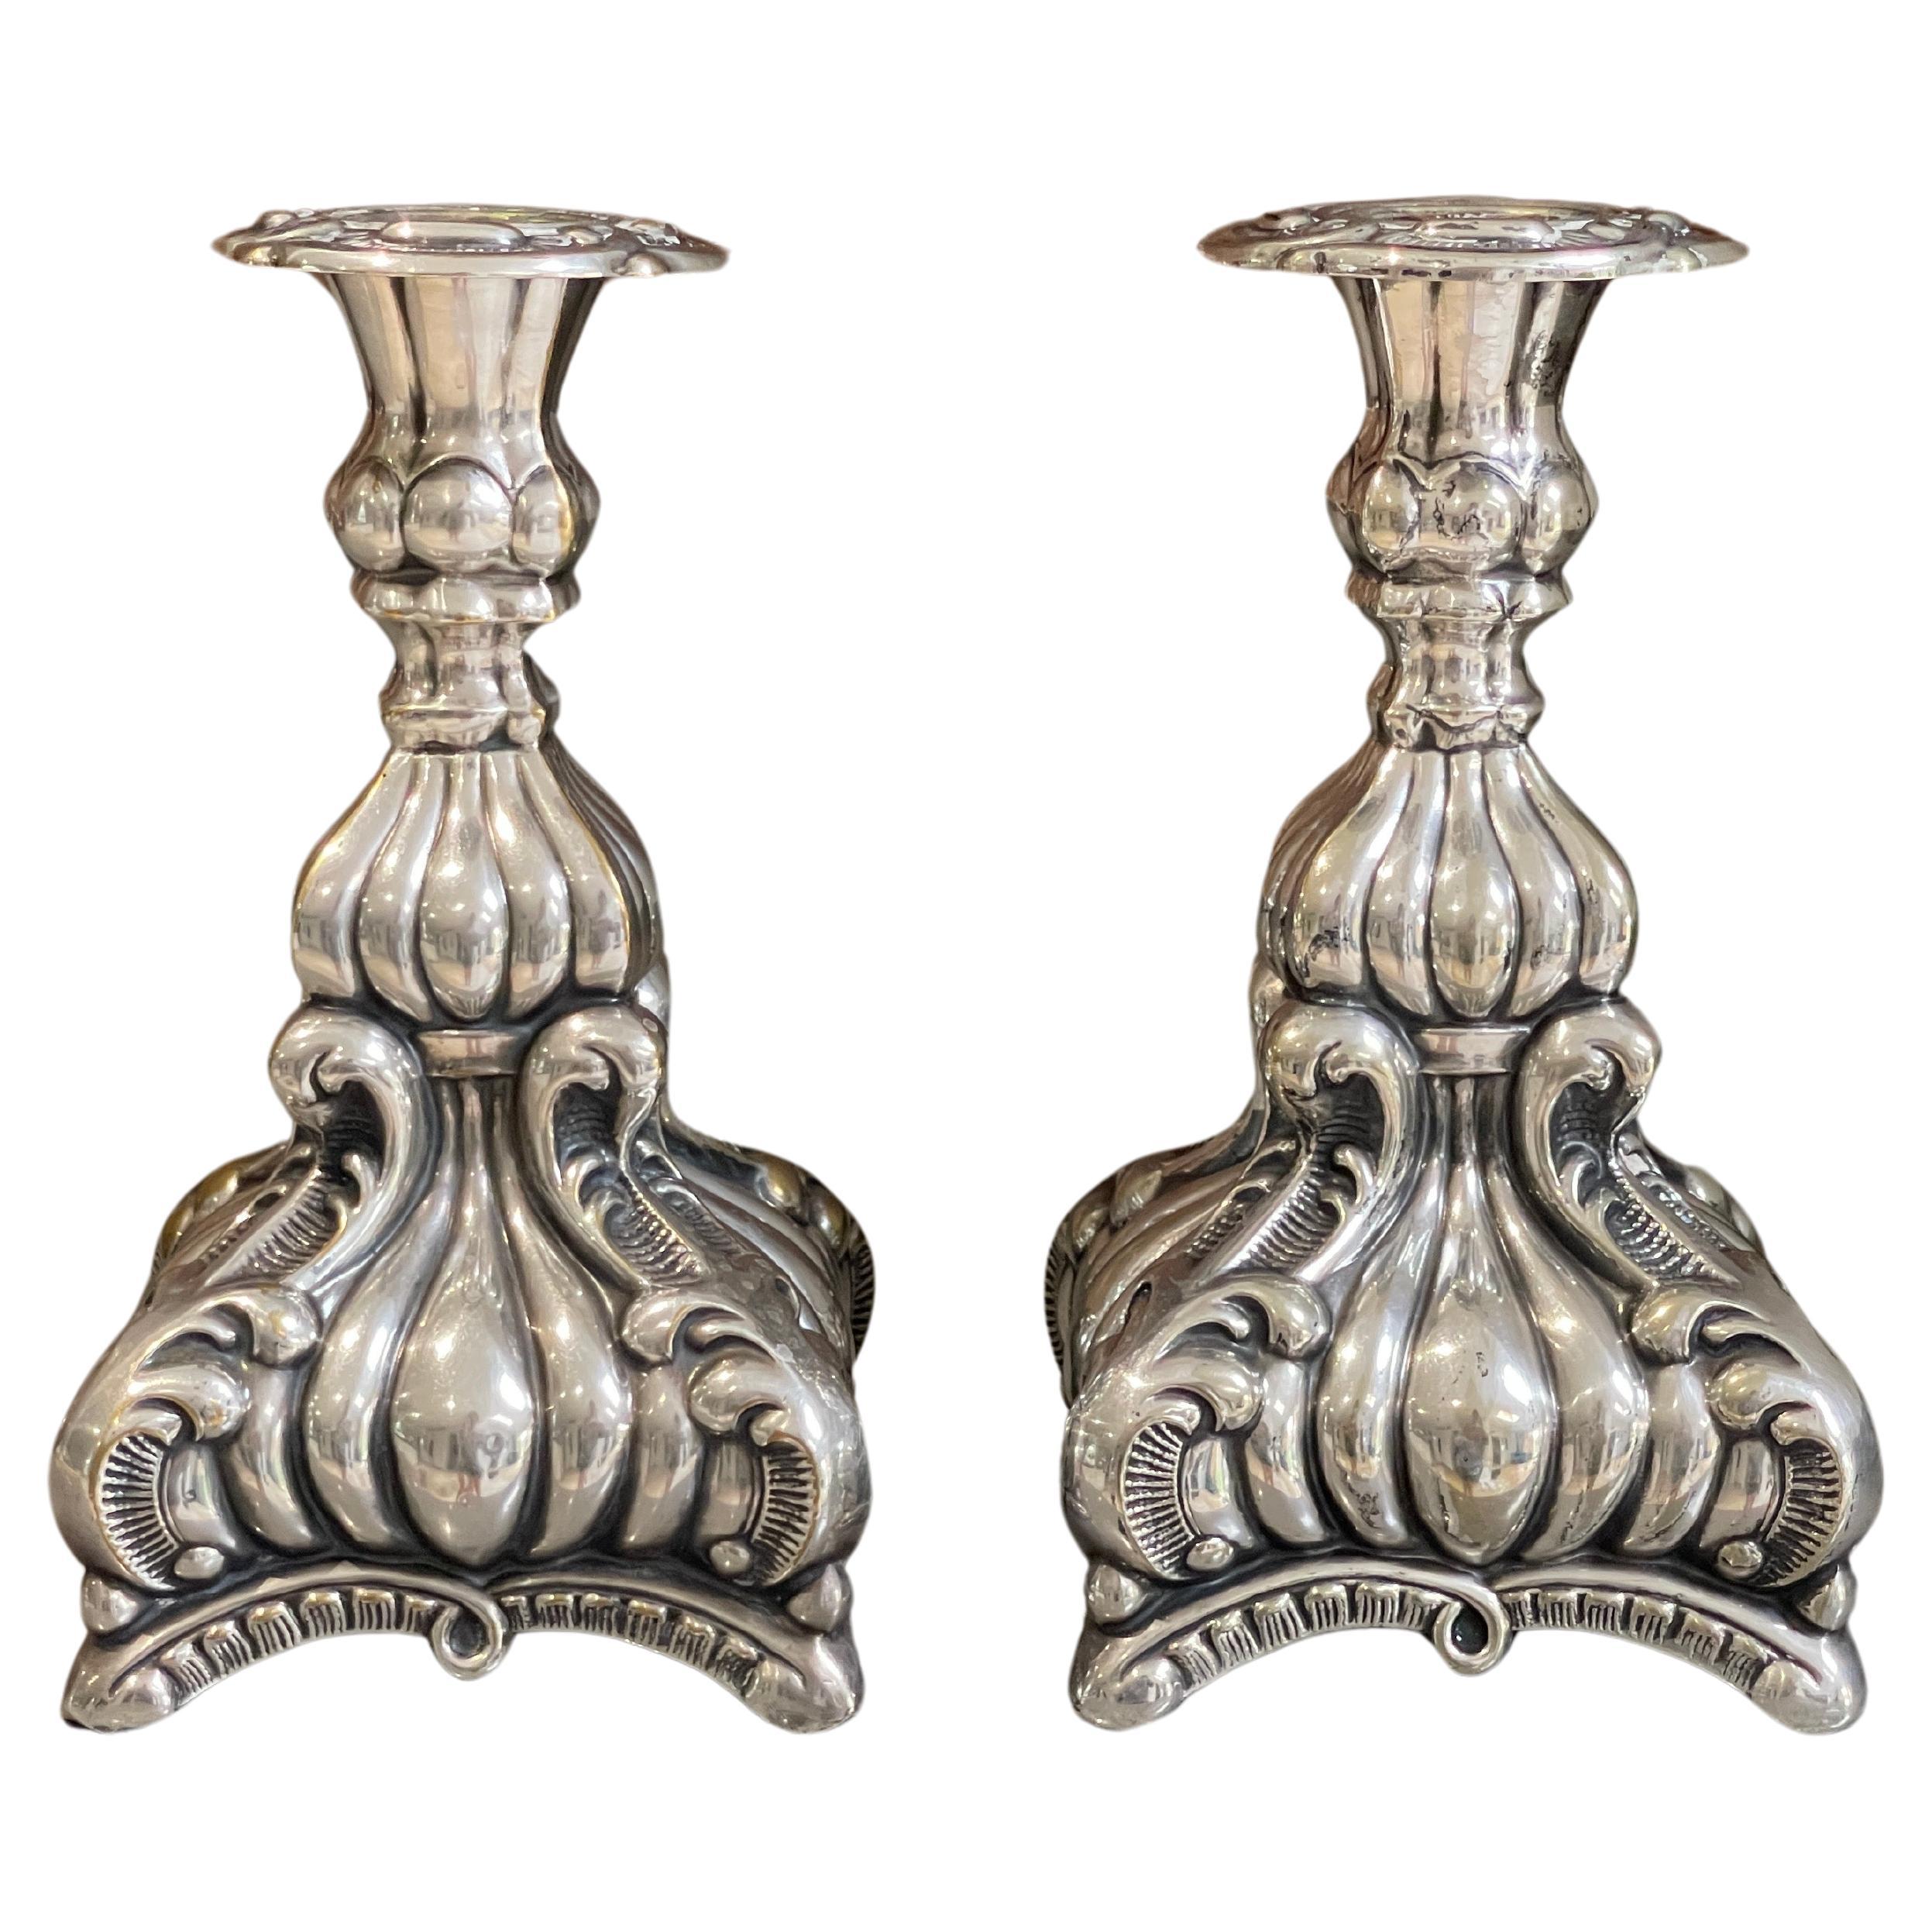 Pair of Candle Holder Silver Antique Rococo Style Candlesticks, Decorative 1930s For Sale